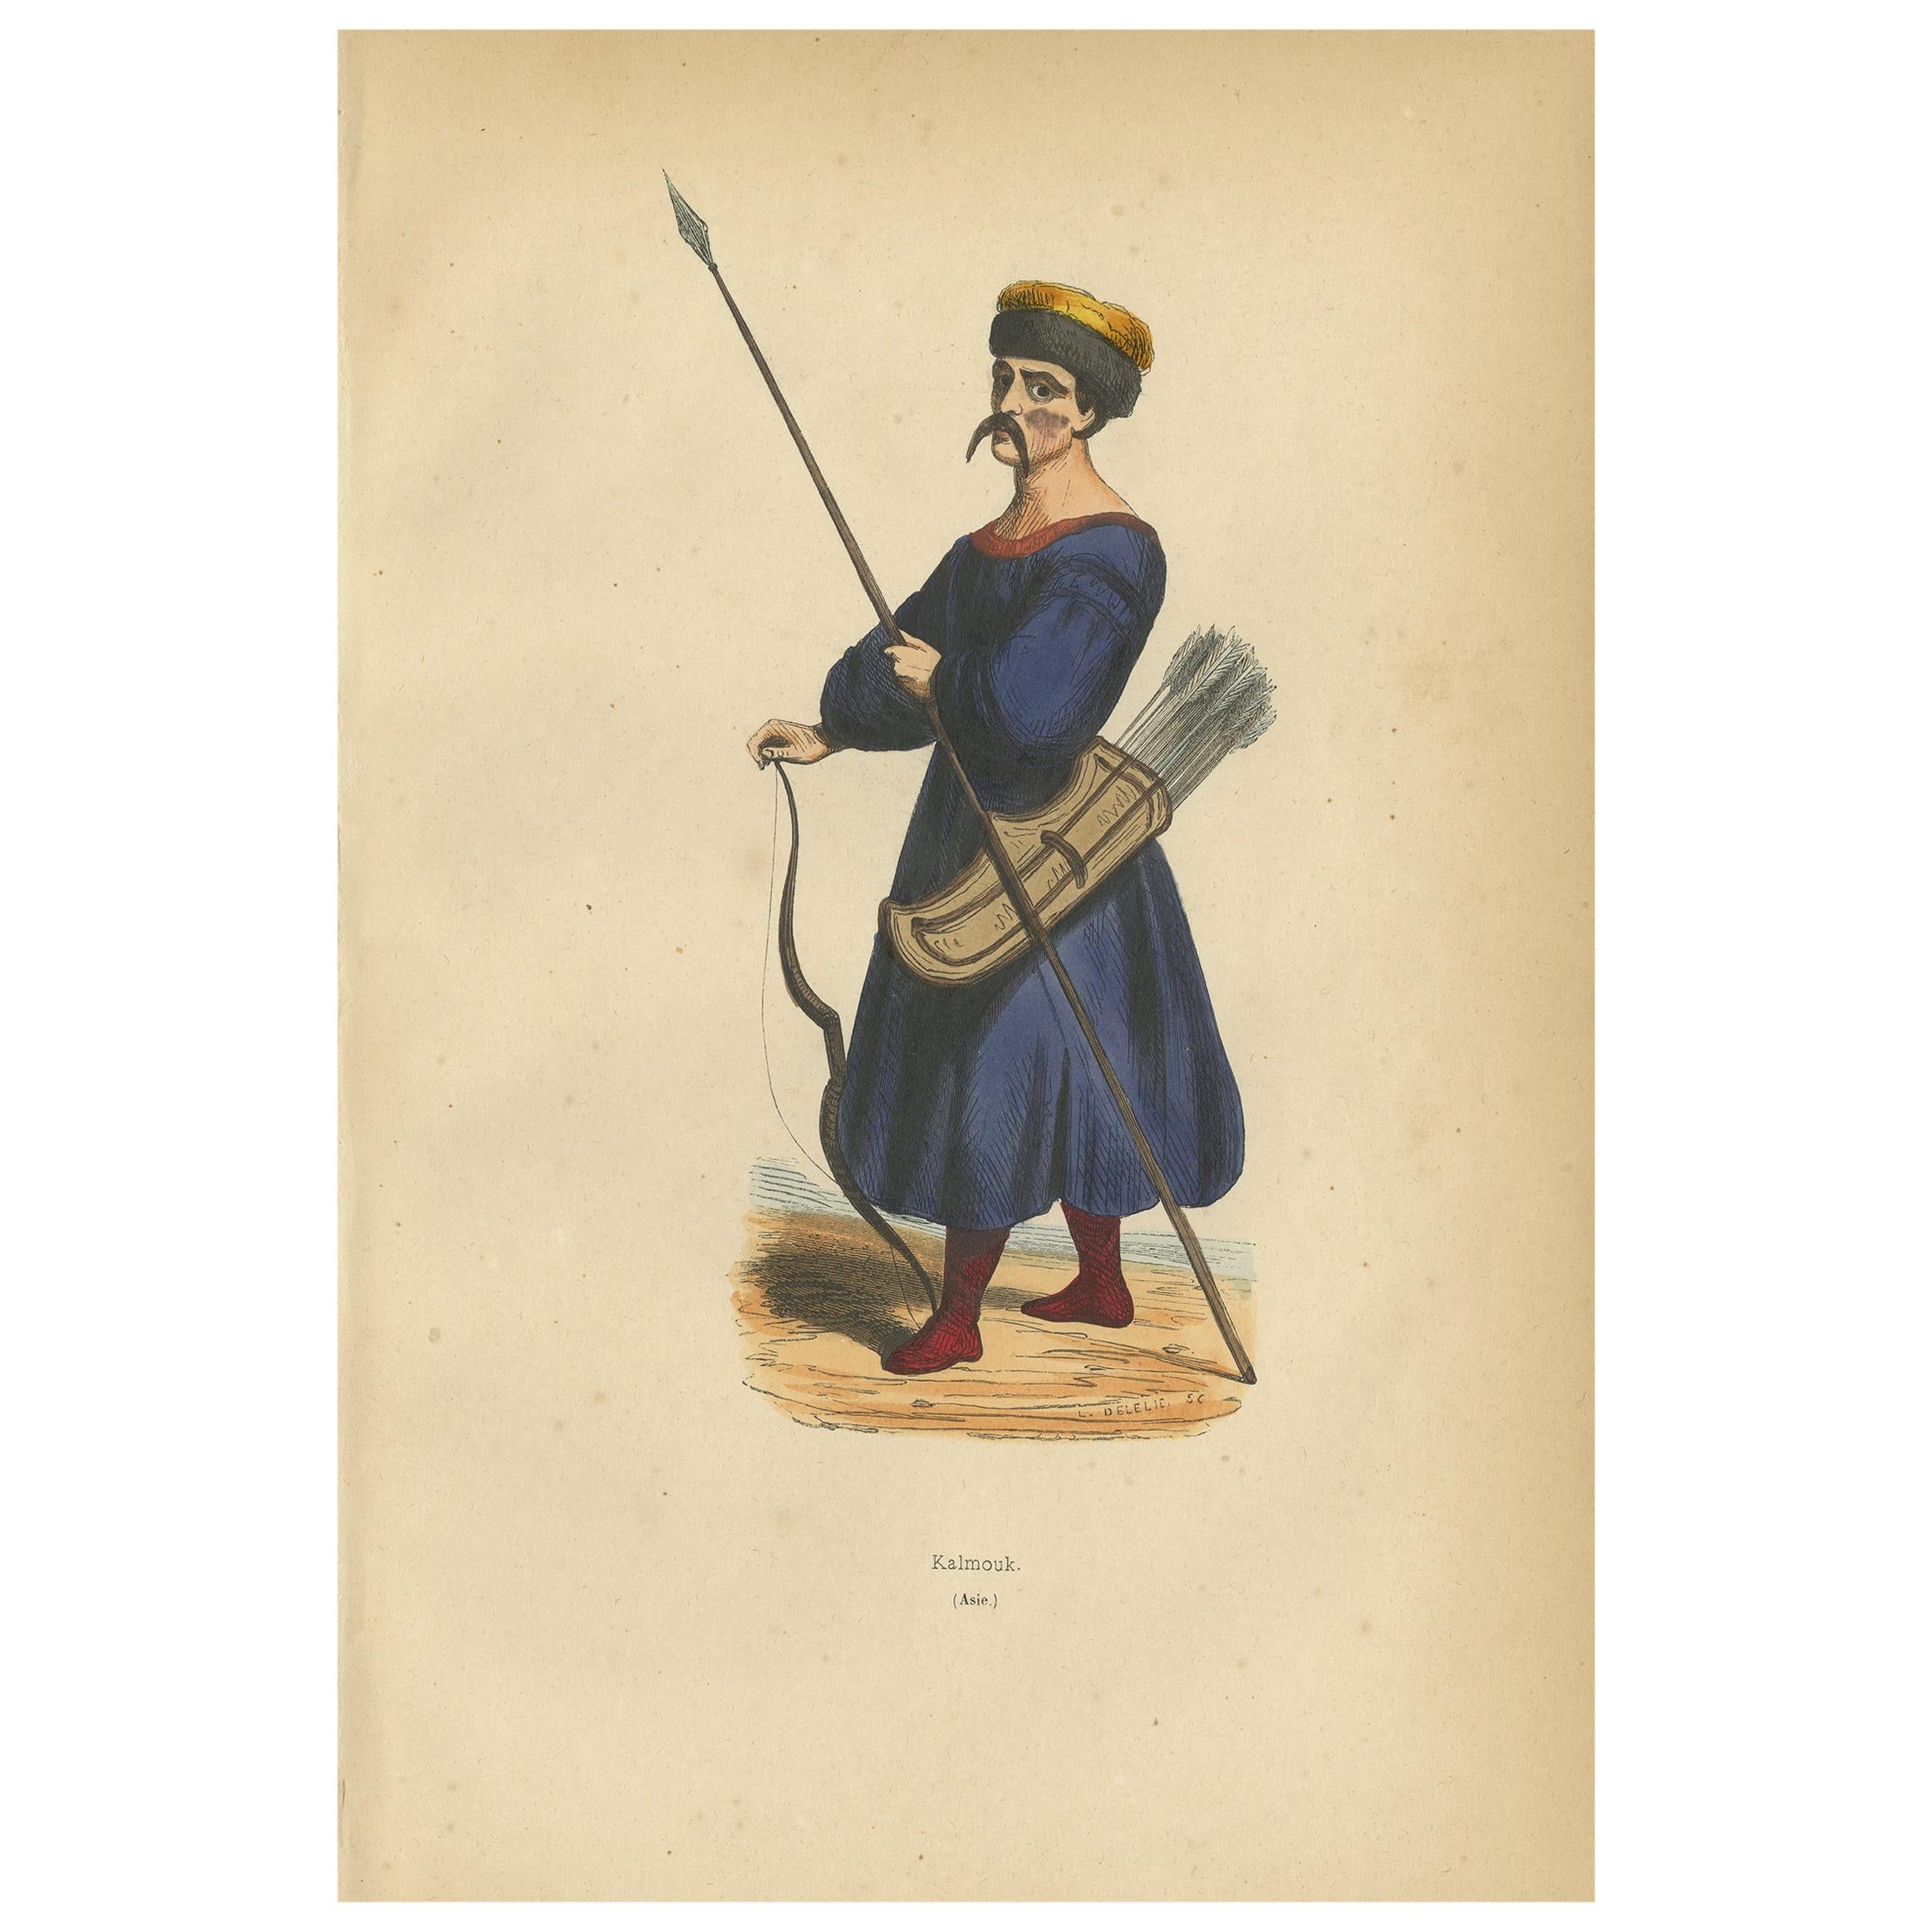 Antique Print of a Kalmyk Man by Wahlen, 1843